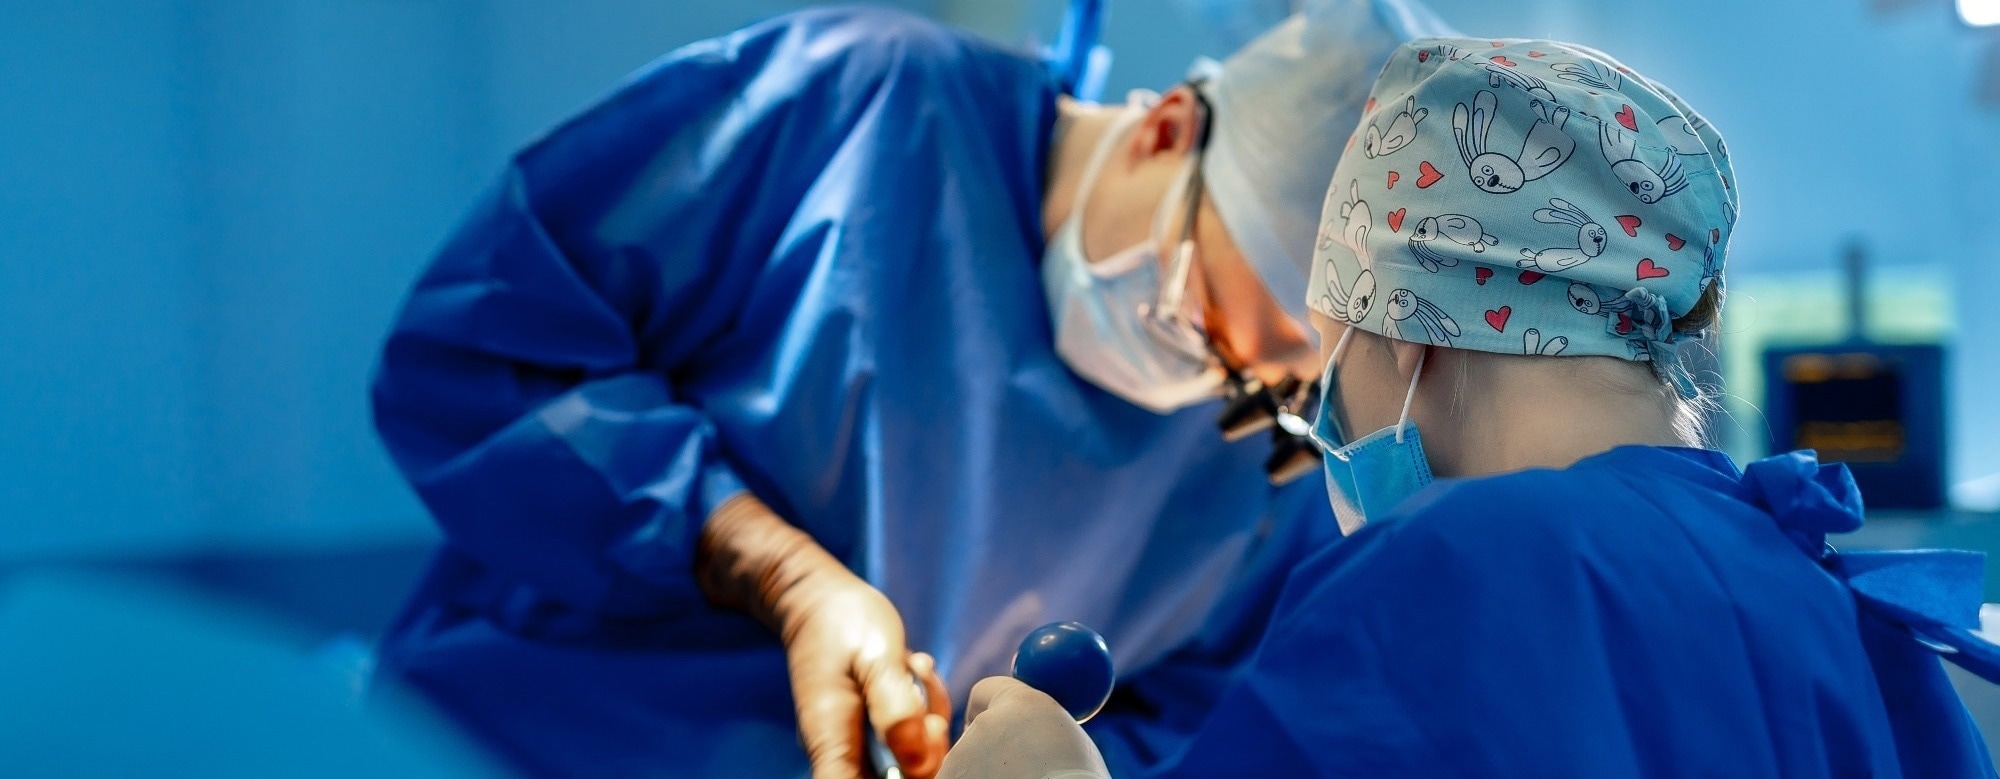 Bariatric surgery outperforms traditional treatments for long-term diabetes control